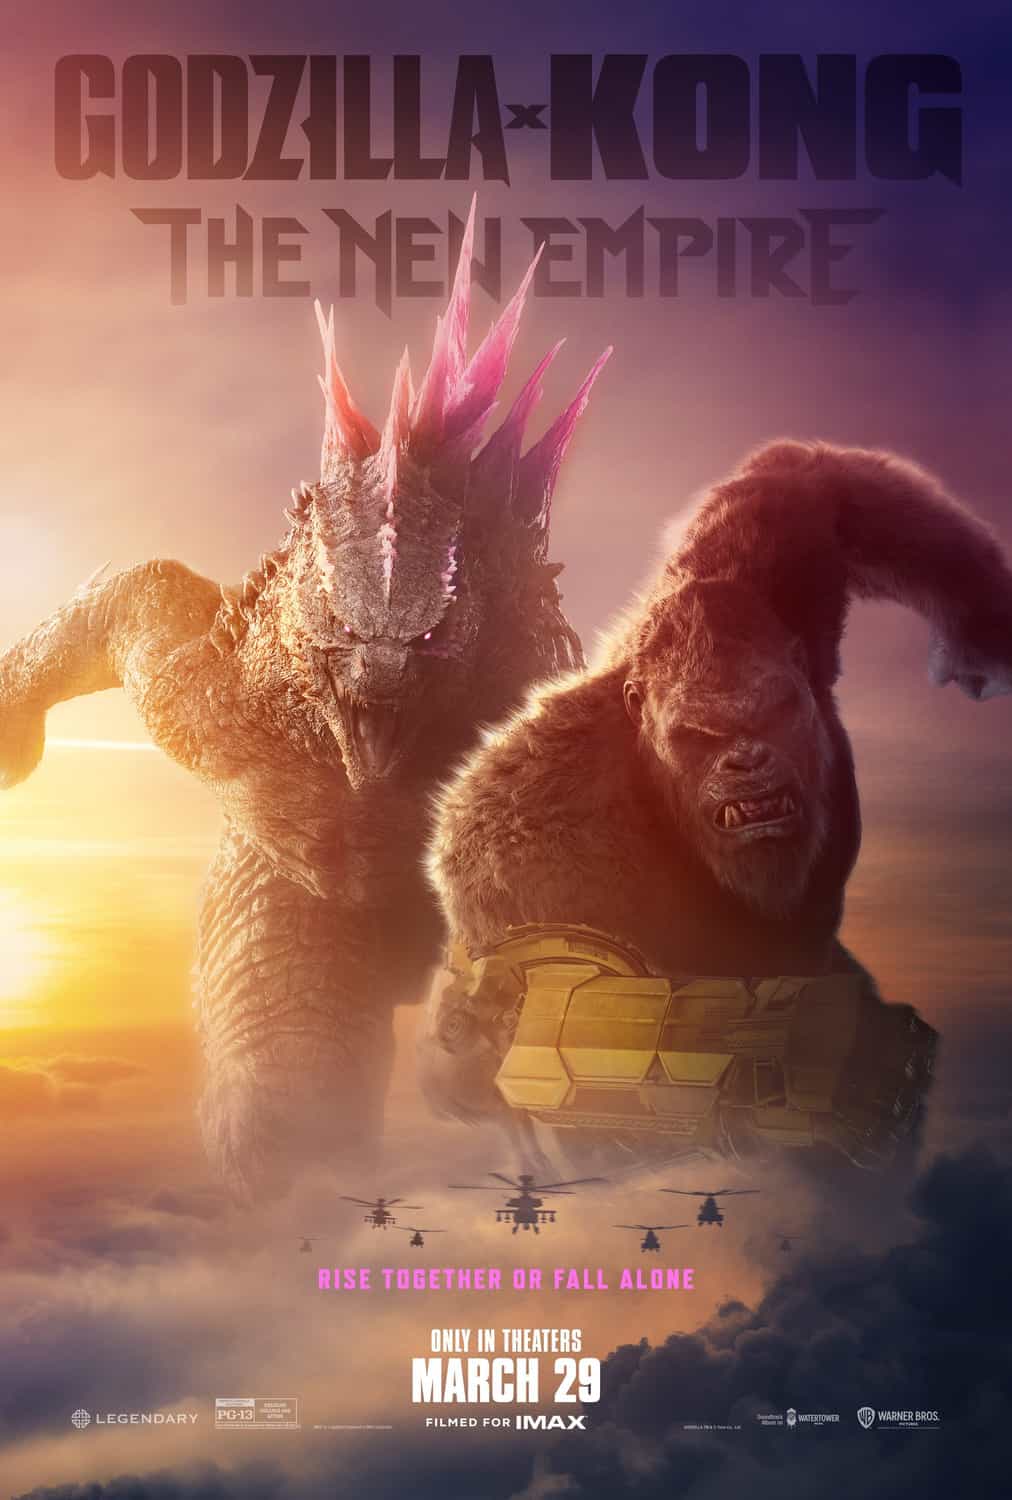 Check out the new trailer and poster for upcoming movie Godzilla x Kong: The New Empire which stars Dan Stevens and Rebecca Hall - movie UK release date 15th March 2024 #godzillaxkongthenewempire